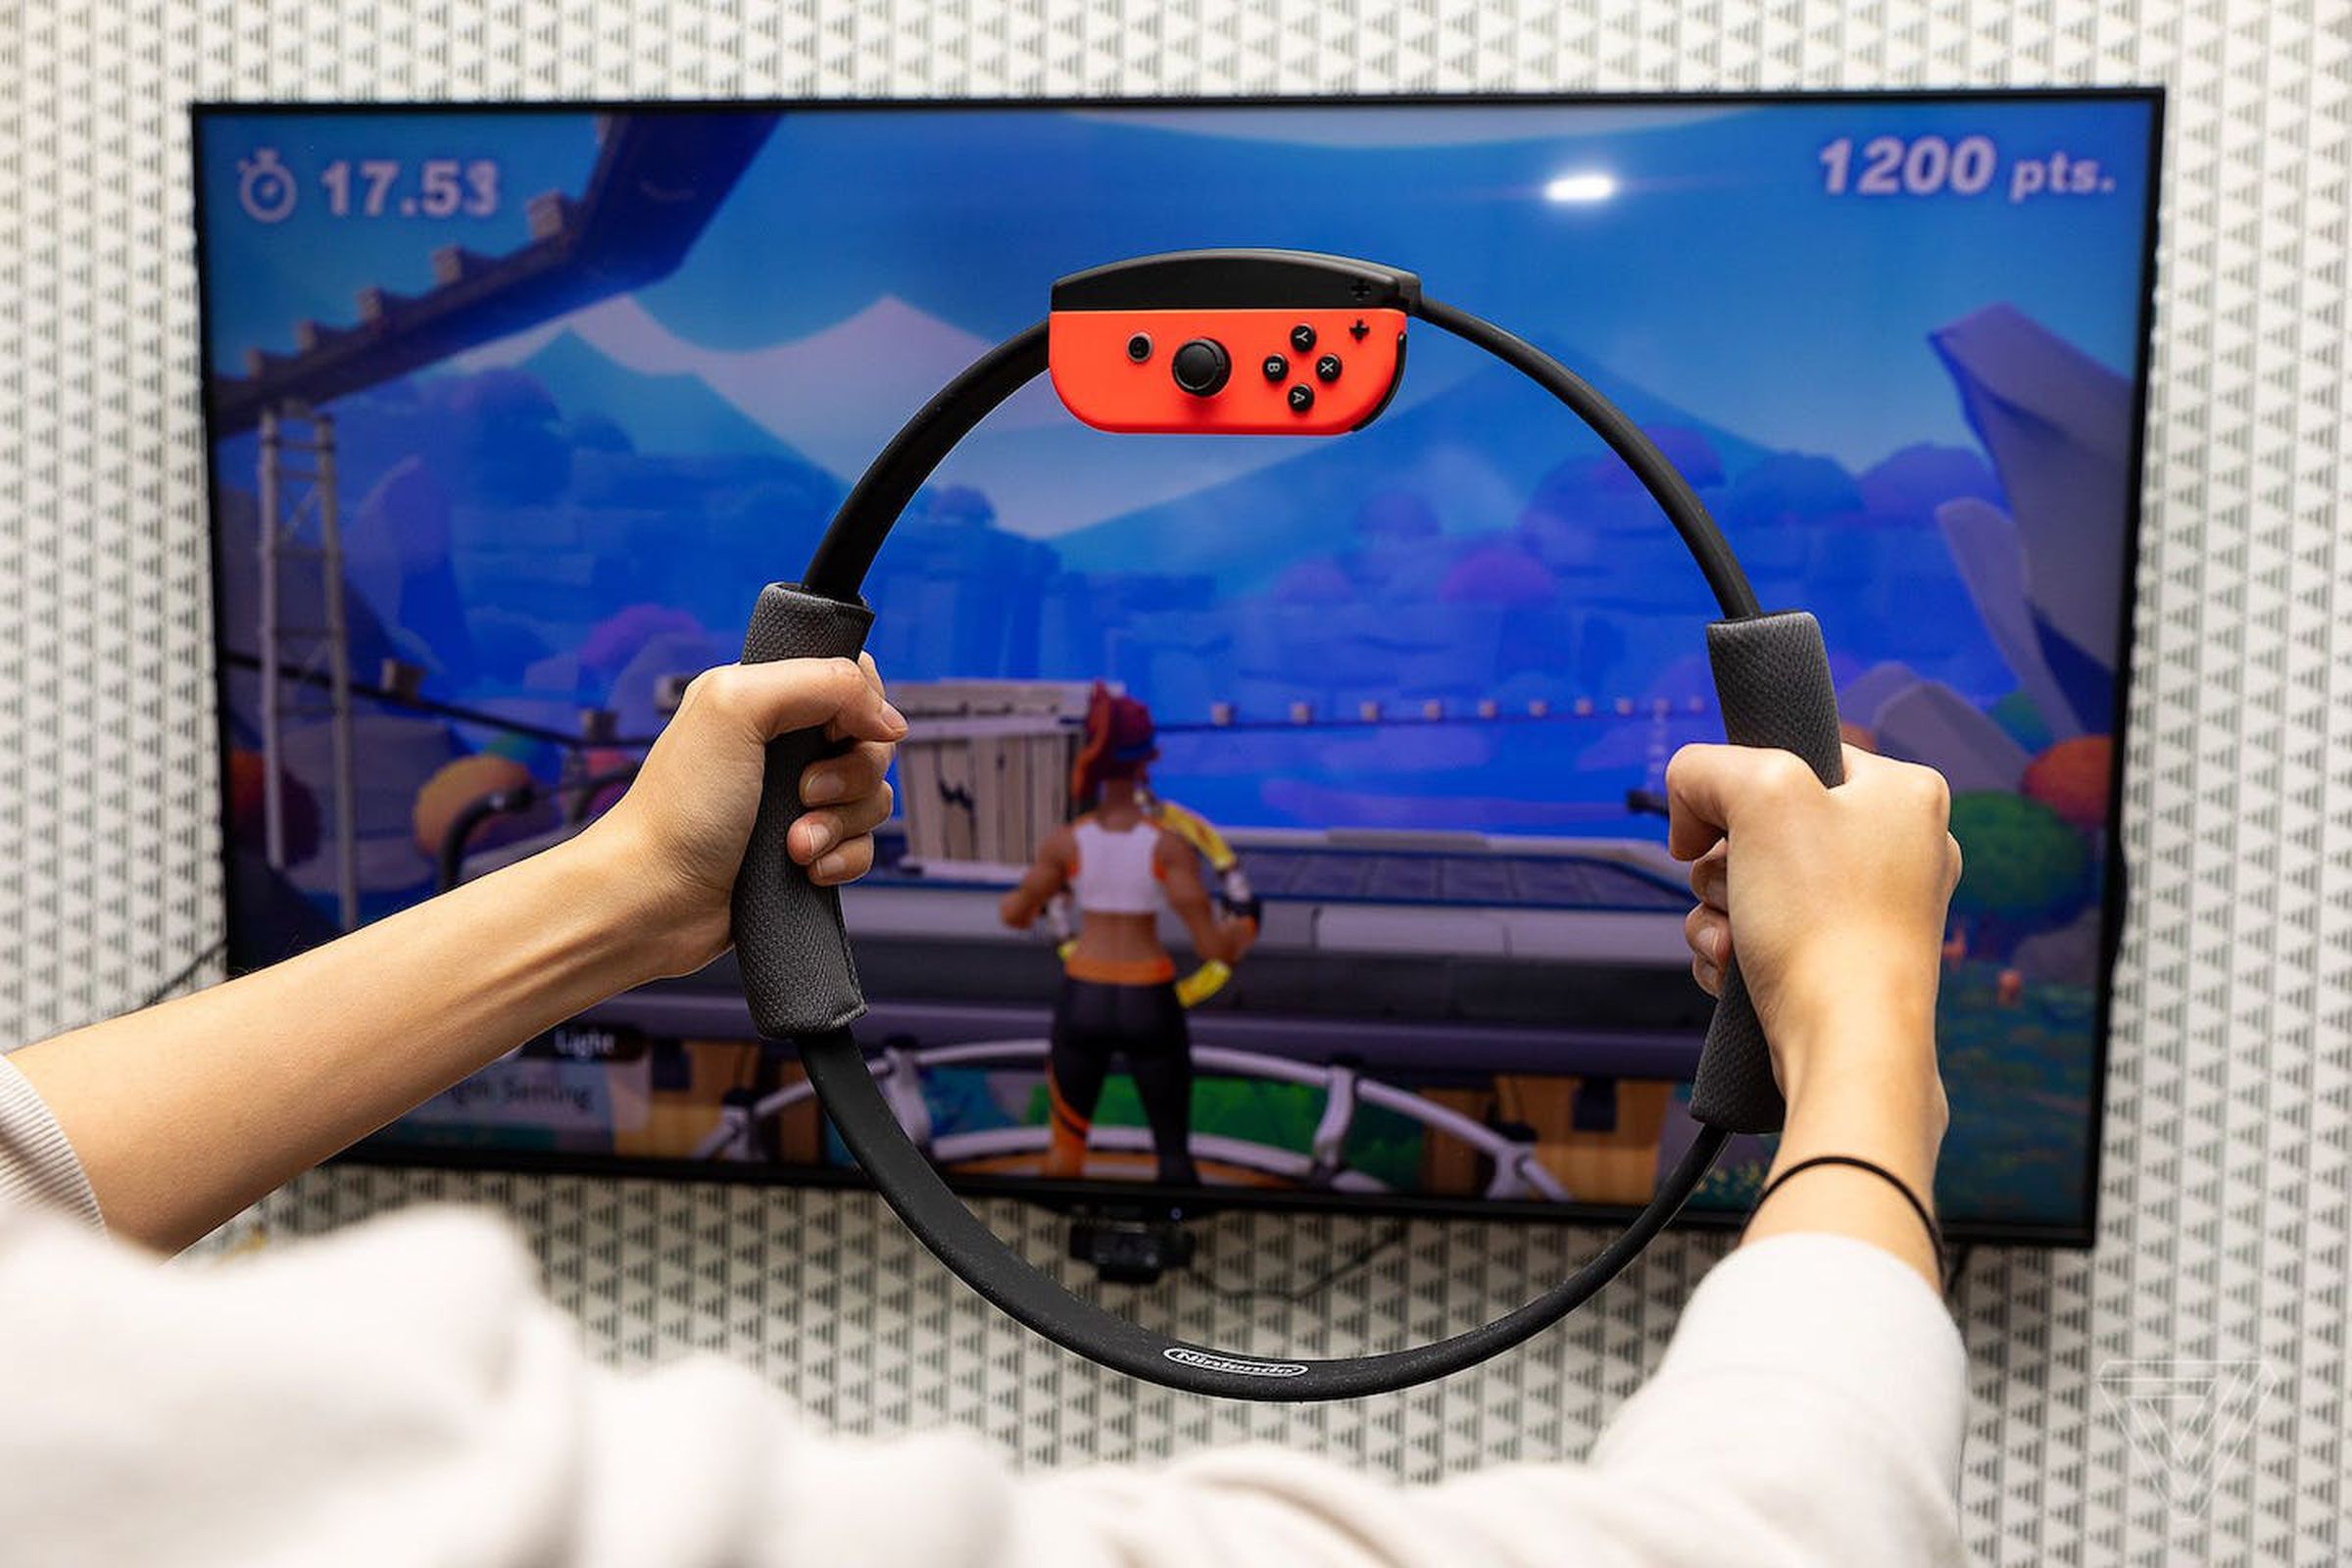 An over-the-shoulder view of a person playing Ring Fit Adventure, a fitness action role-playing game for the Nintendo Switch. The player is holding the Ring Fit controller, a pilates ring with a Switch Joy-Con controller attached to it at arm’s length in front of a TV with the game on-screen.